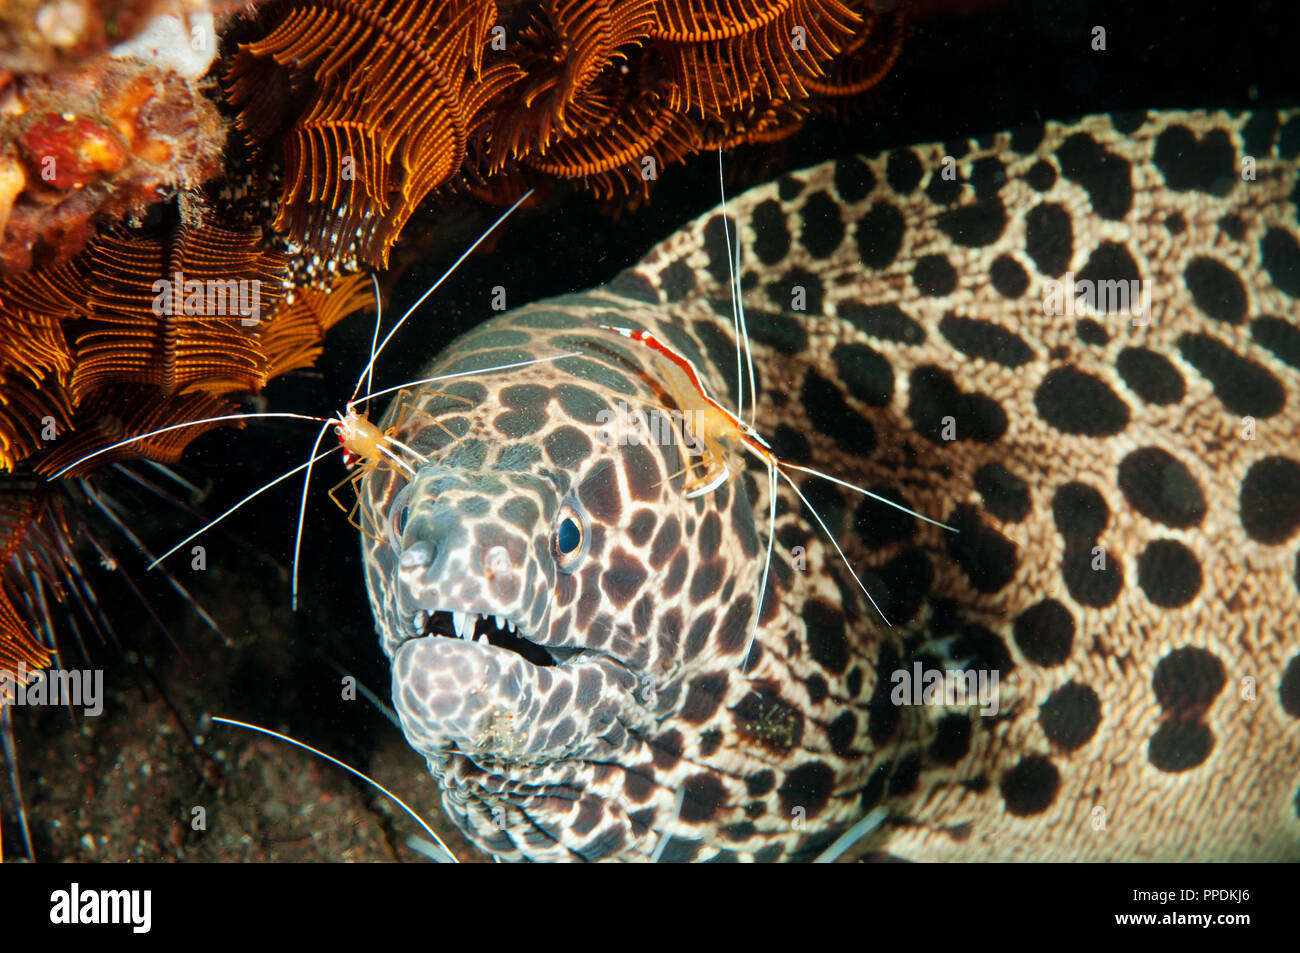 Honeycomb moray eel, Gymnothorax favagineus, being cleaned by cleaner shrimps, Lysmata amboinensis, Bali Indonesia. Stock Photo